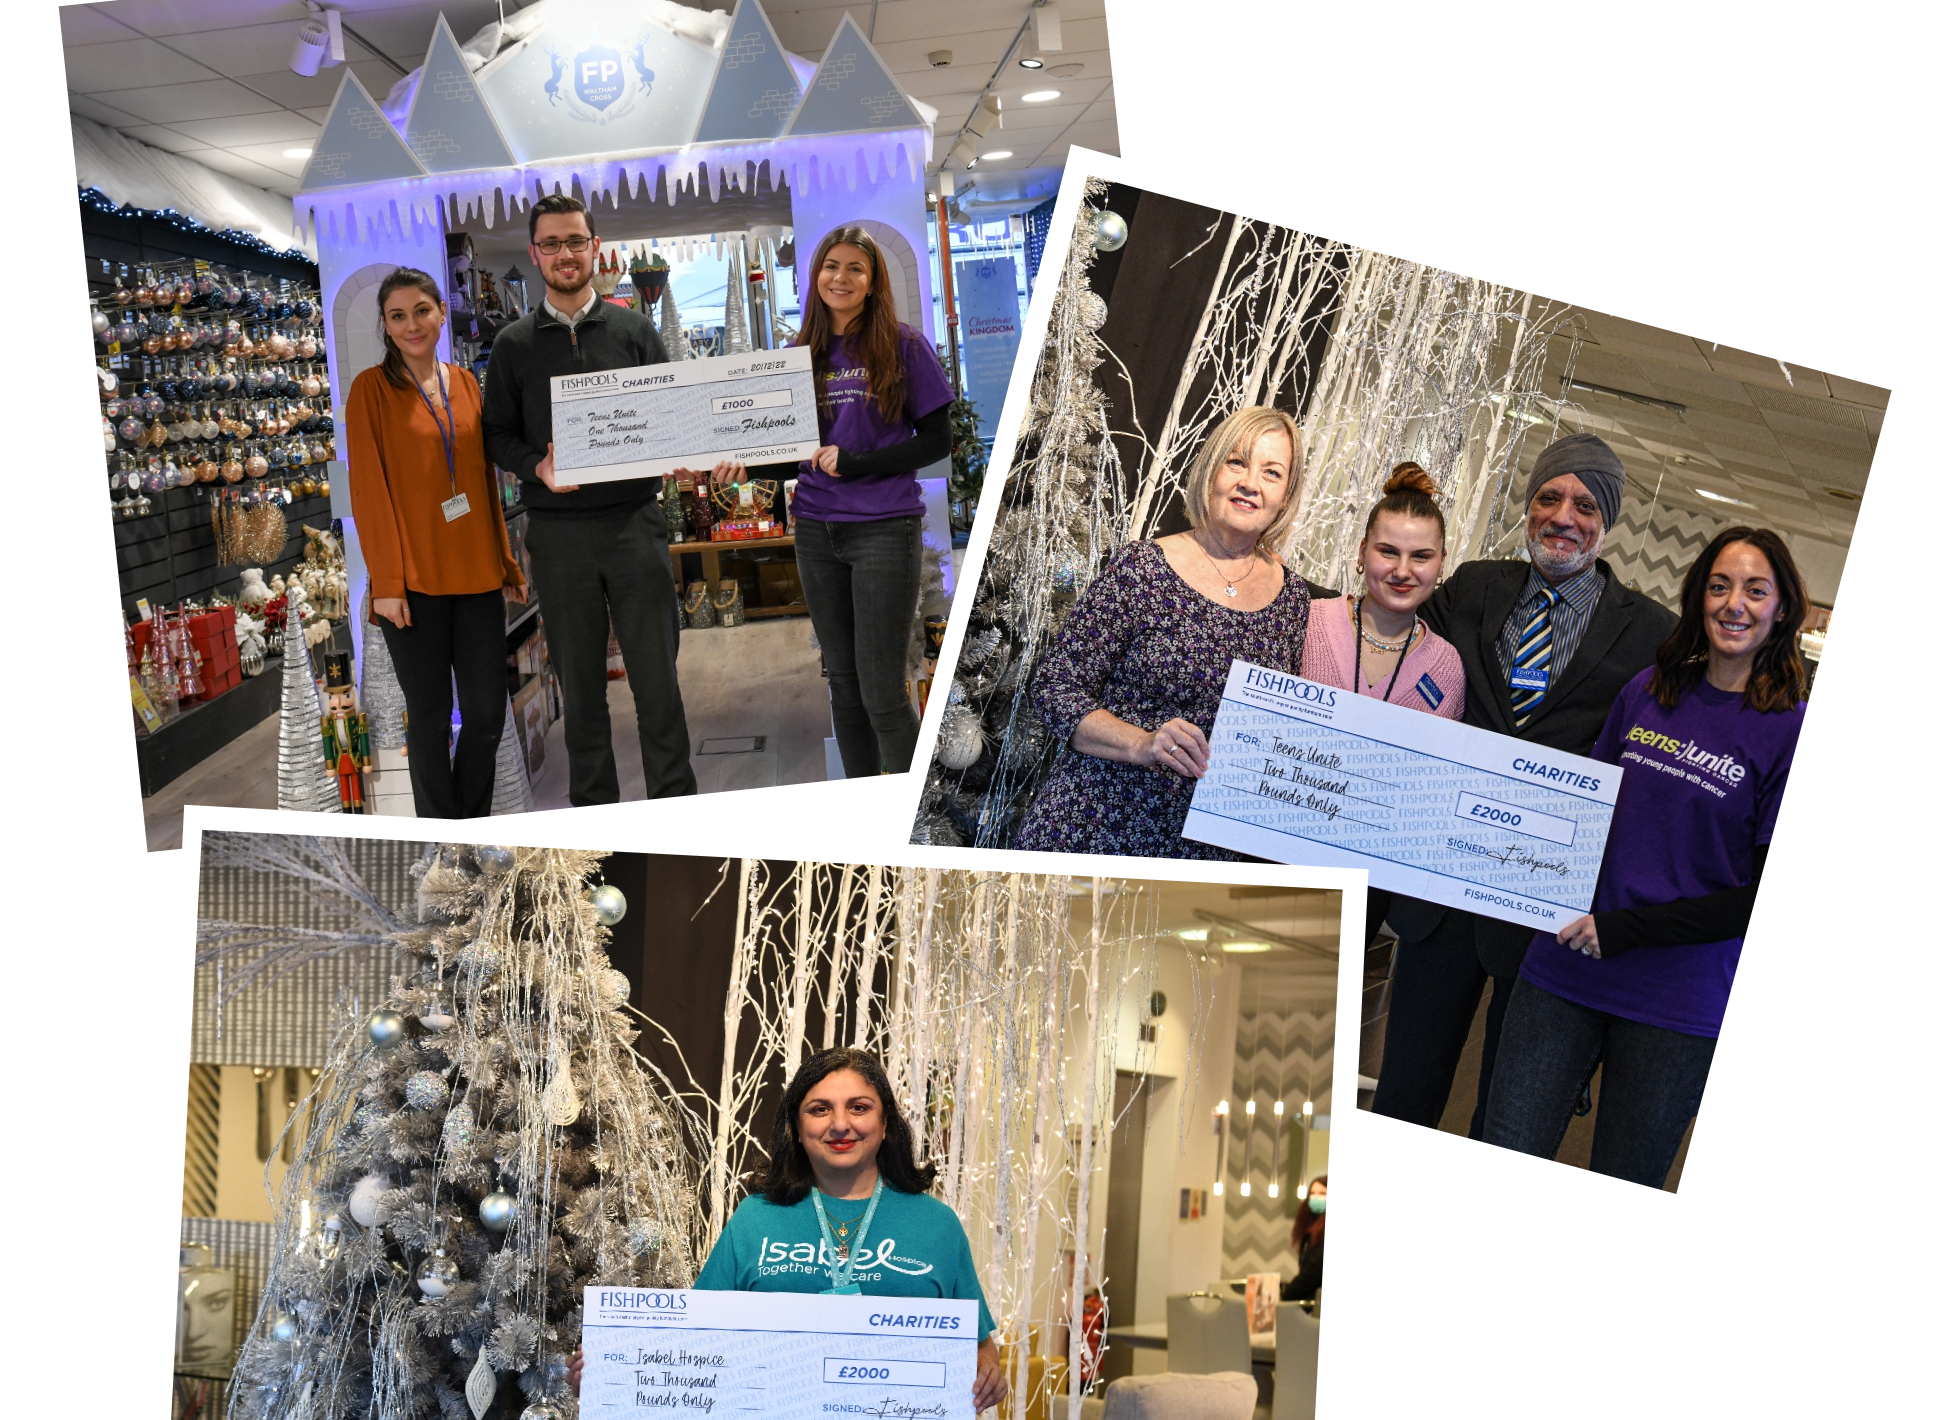  
Christmas is such an important time of year for Fishpools, and we know it’s no different for our charity partners. They both support people who are in greater need of services around that time, which is why we’re so proud that we’re able to present both charities with a large donation every Christmas.